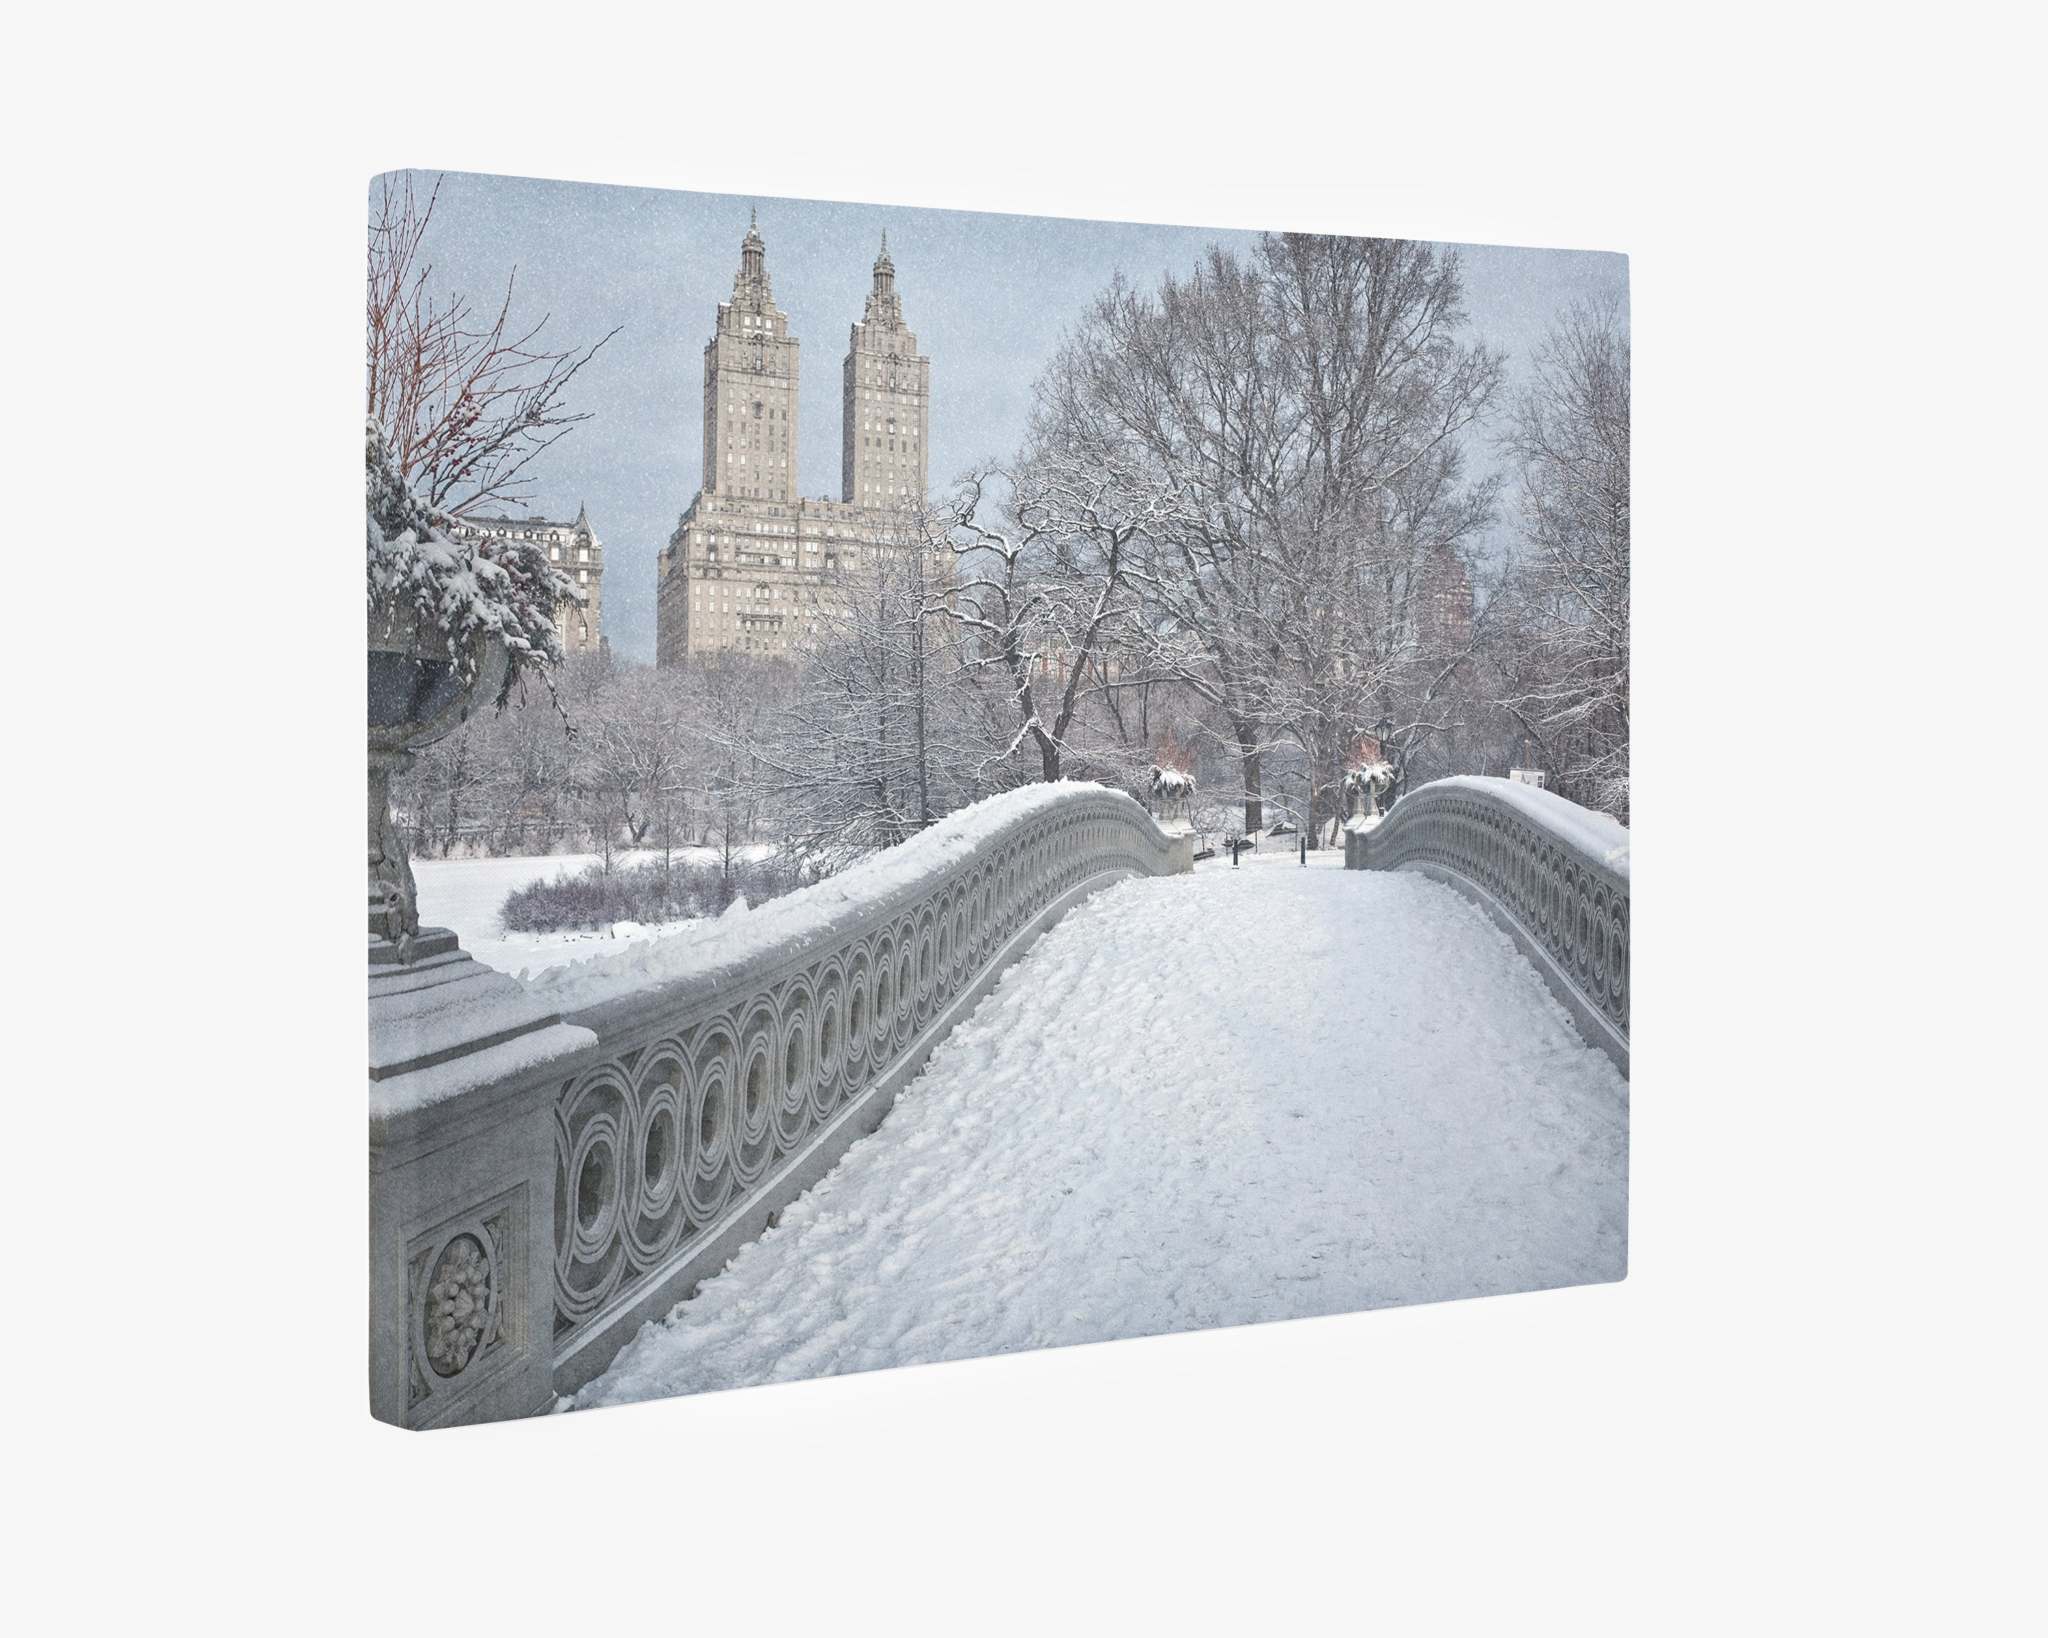 A snow-covered Bow Bridge in Central Park, New York City, leads the viewer&#39;s eye towards two prominent, twin-towered buildings in the background. Trees laden with snow frame the scene, adding to the wintery atmosphere. The sky is overcast, enhancing the serene ambiance perfect for a New York City Canvas Wall Art, &#39;Snow on Bow Bridge&#39; by Offley Green.